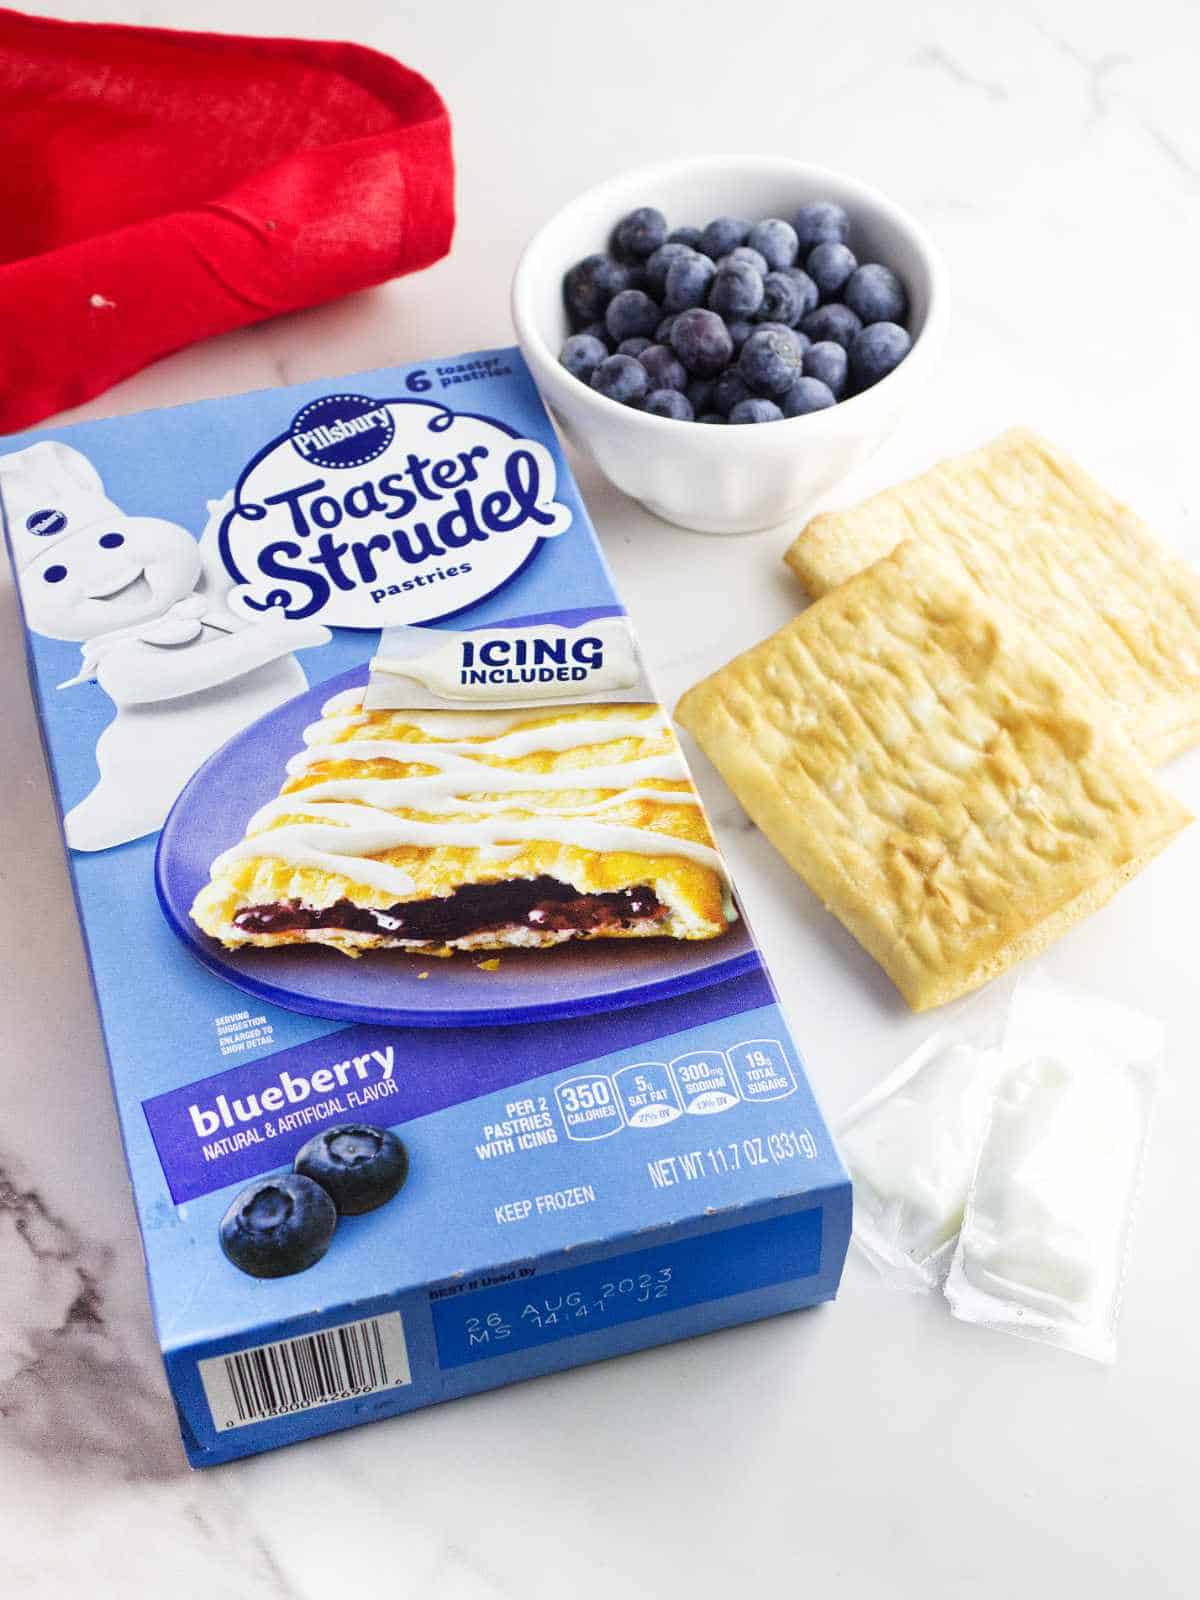 Pillsbury blueberry toaster strudels, icing, and blueberries.